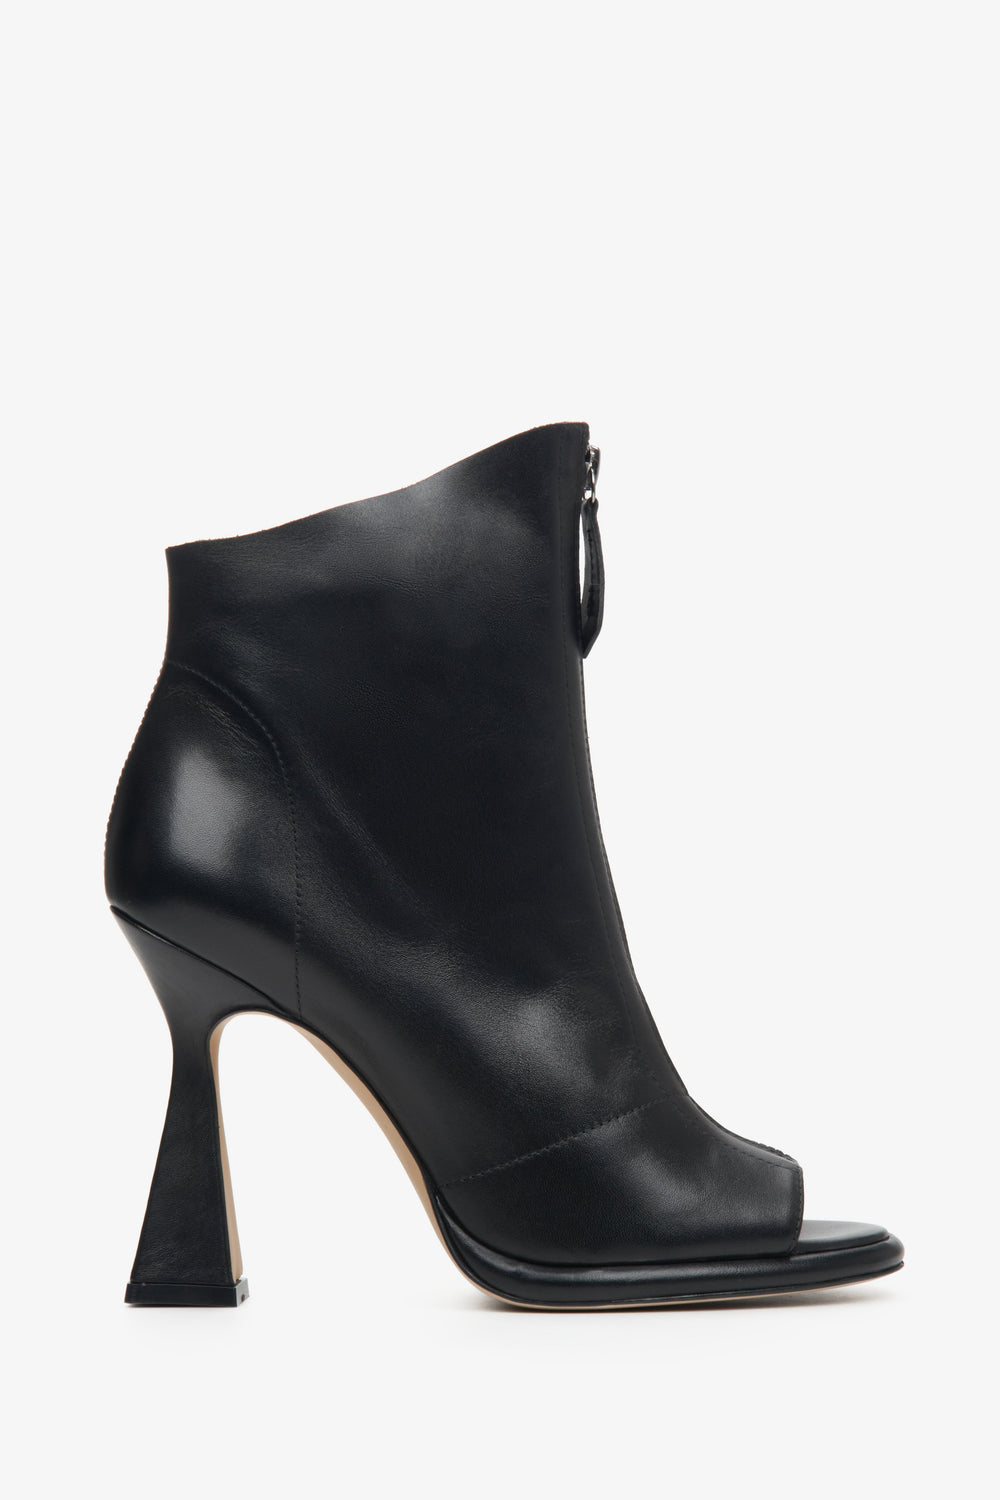 Black Open Toe Ankle Boots with a Funnel Heel Estro ER00112869